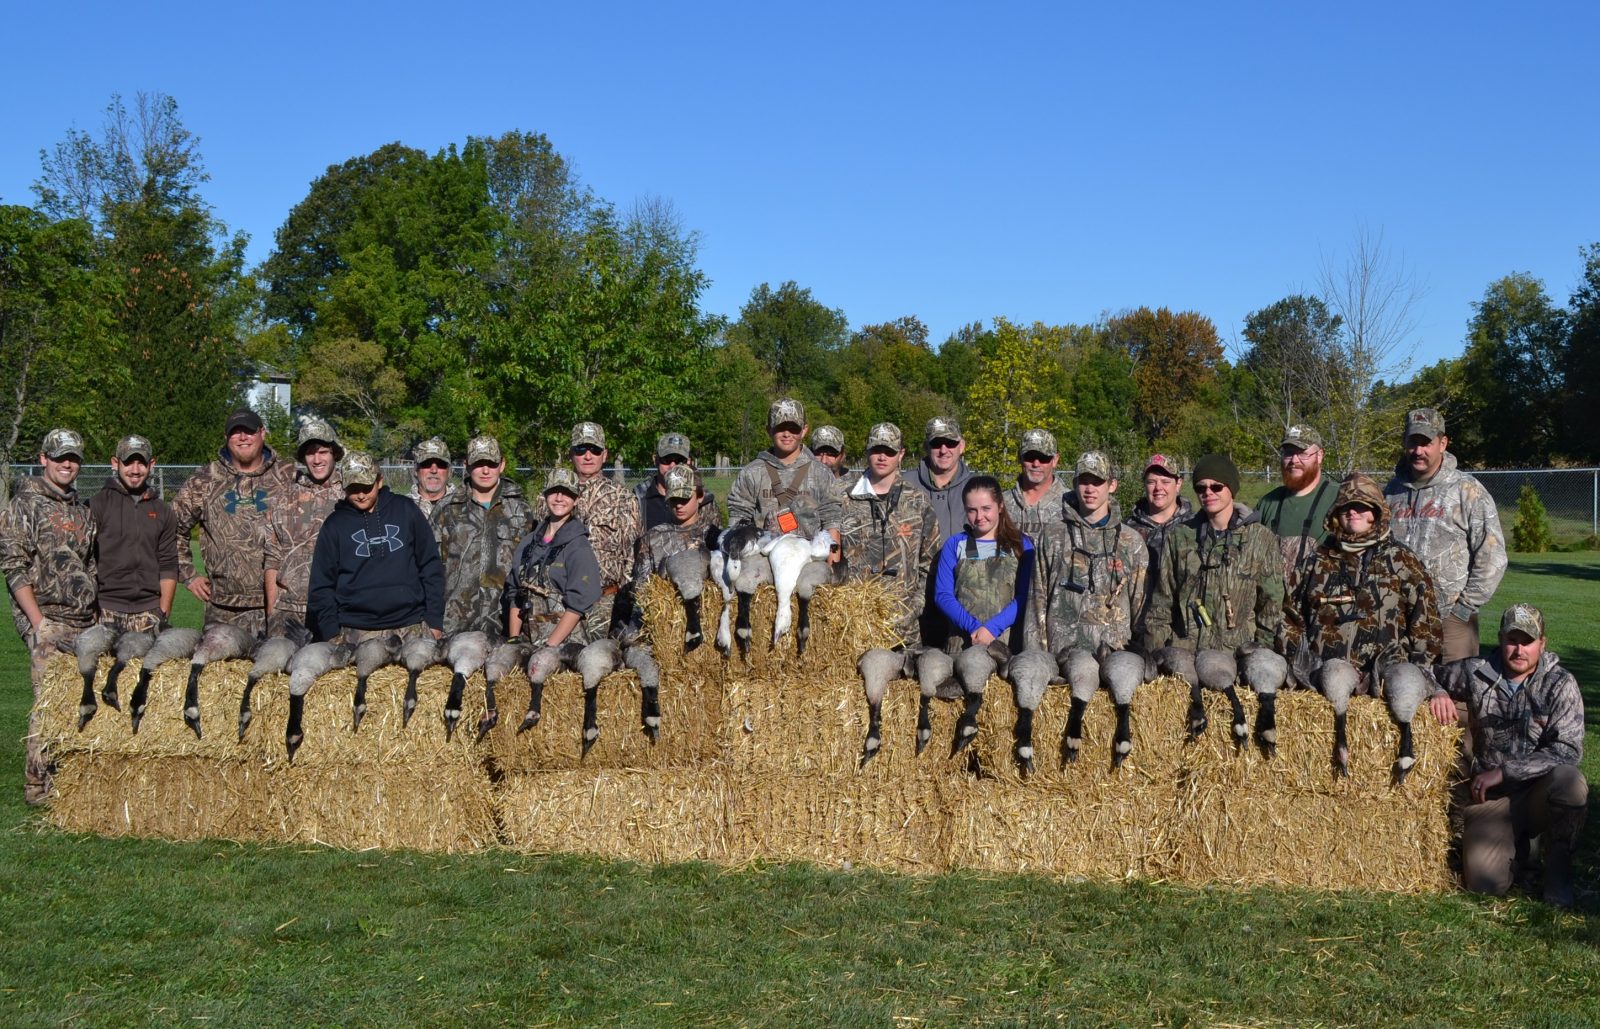 Another full year for First Hunt program